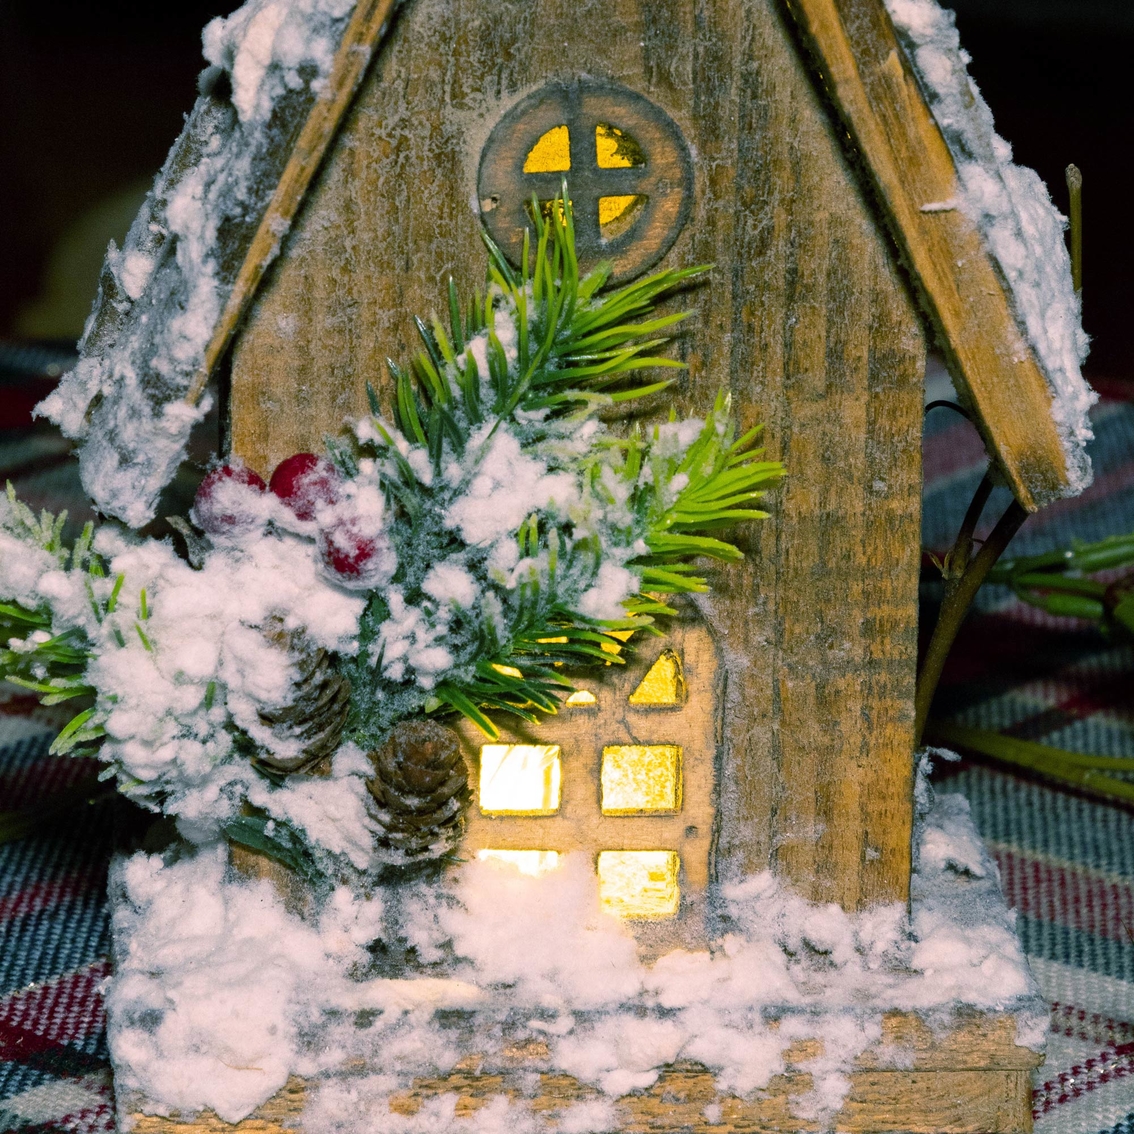 Alpine Christmas Wooden House - Image 3 of 3